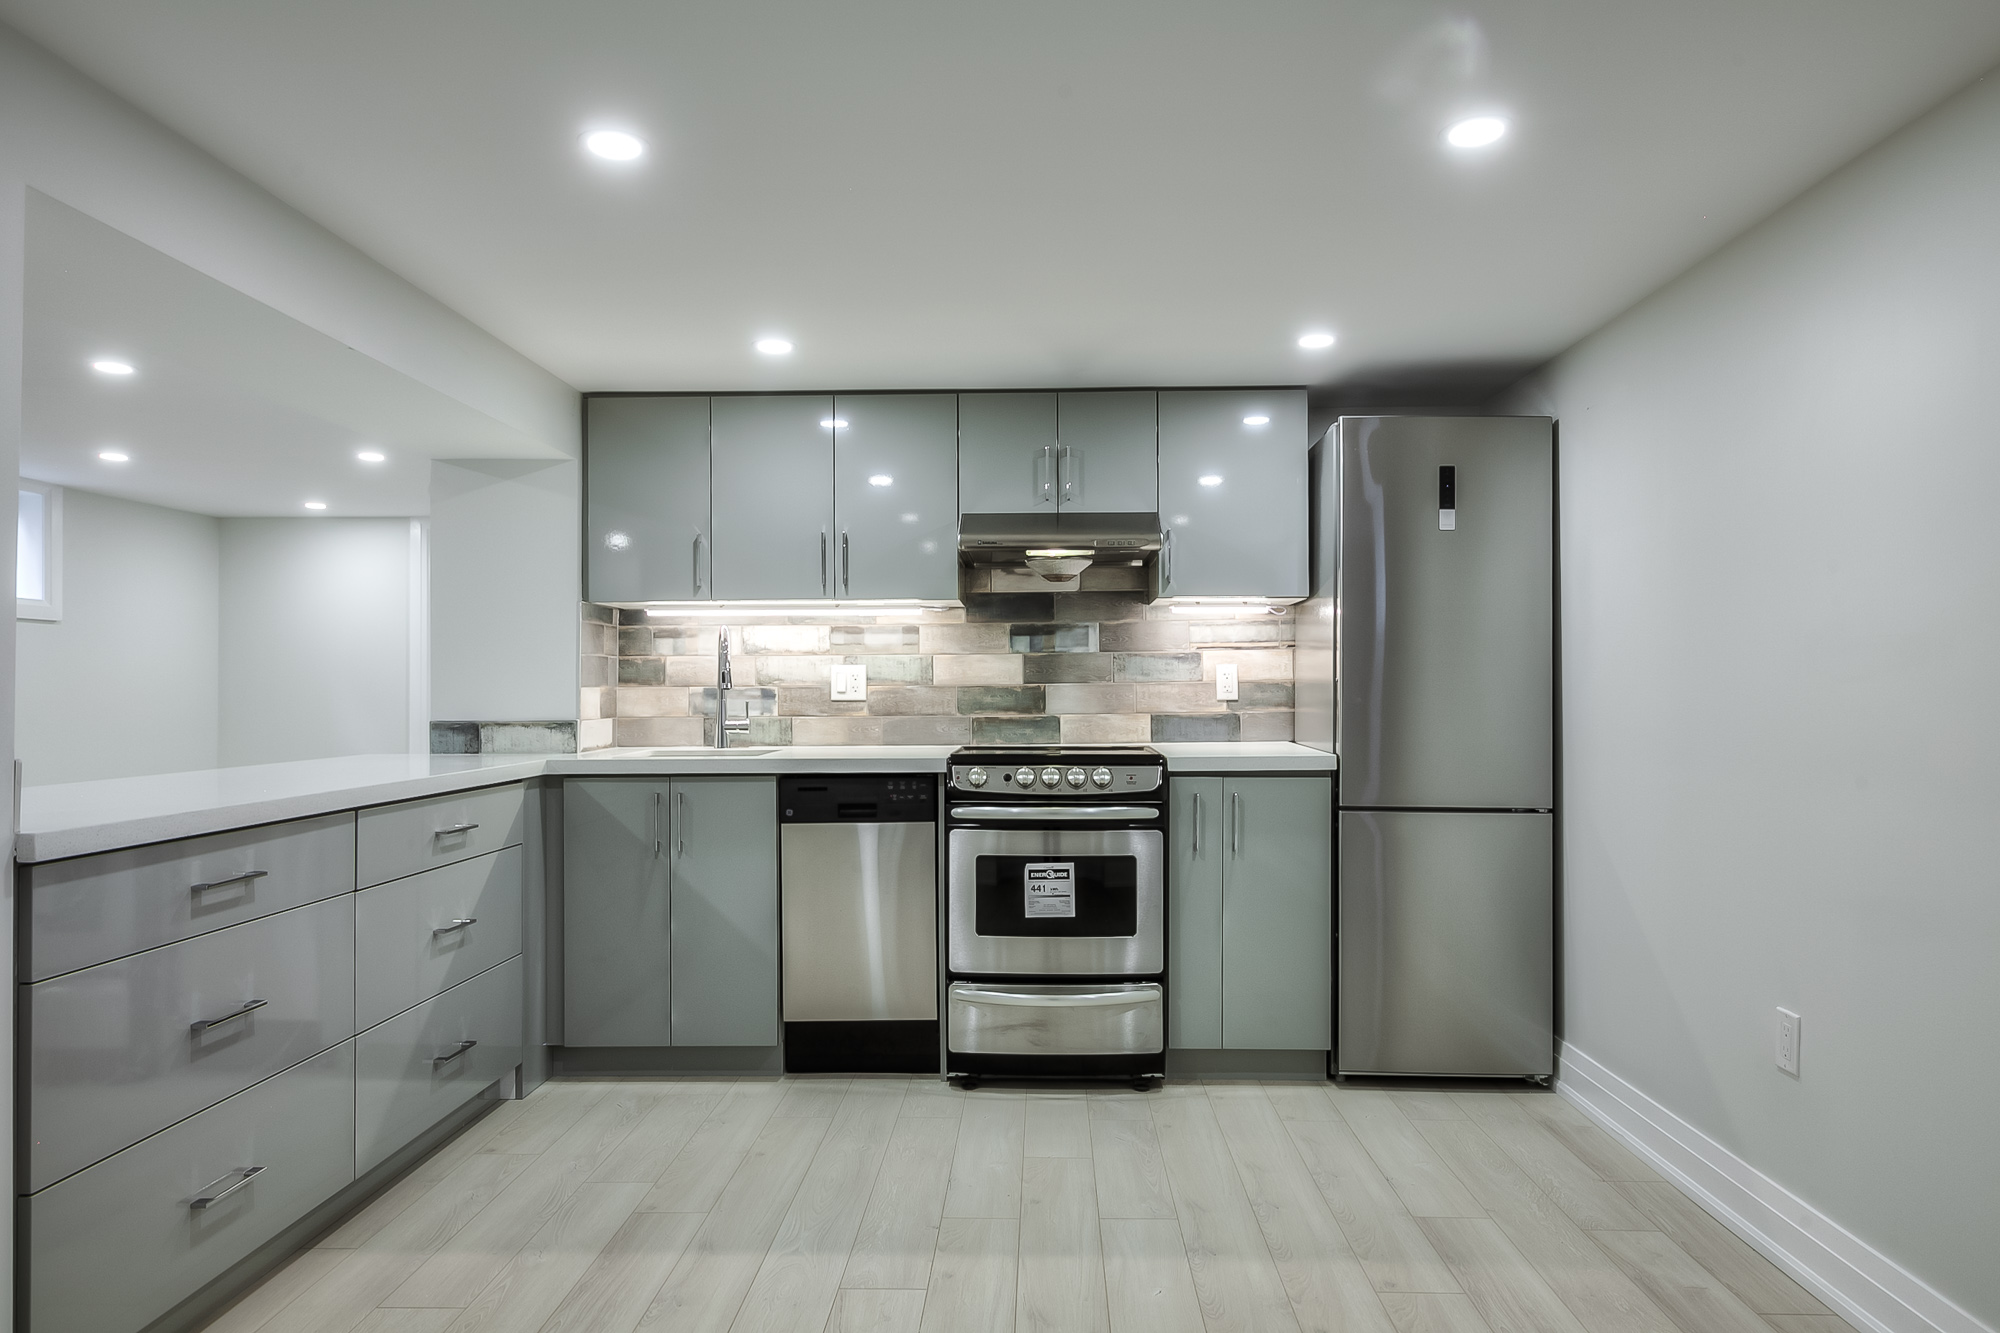 kitchen with white cupboards and counters and stainless steel appliances